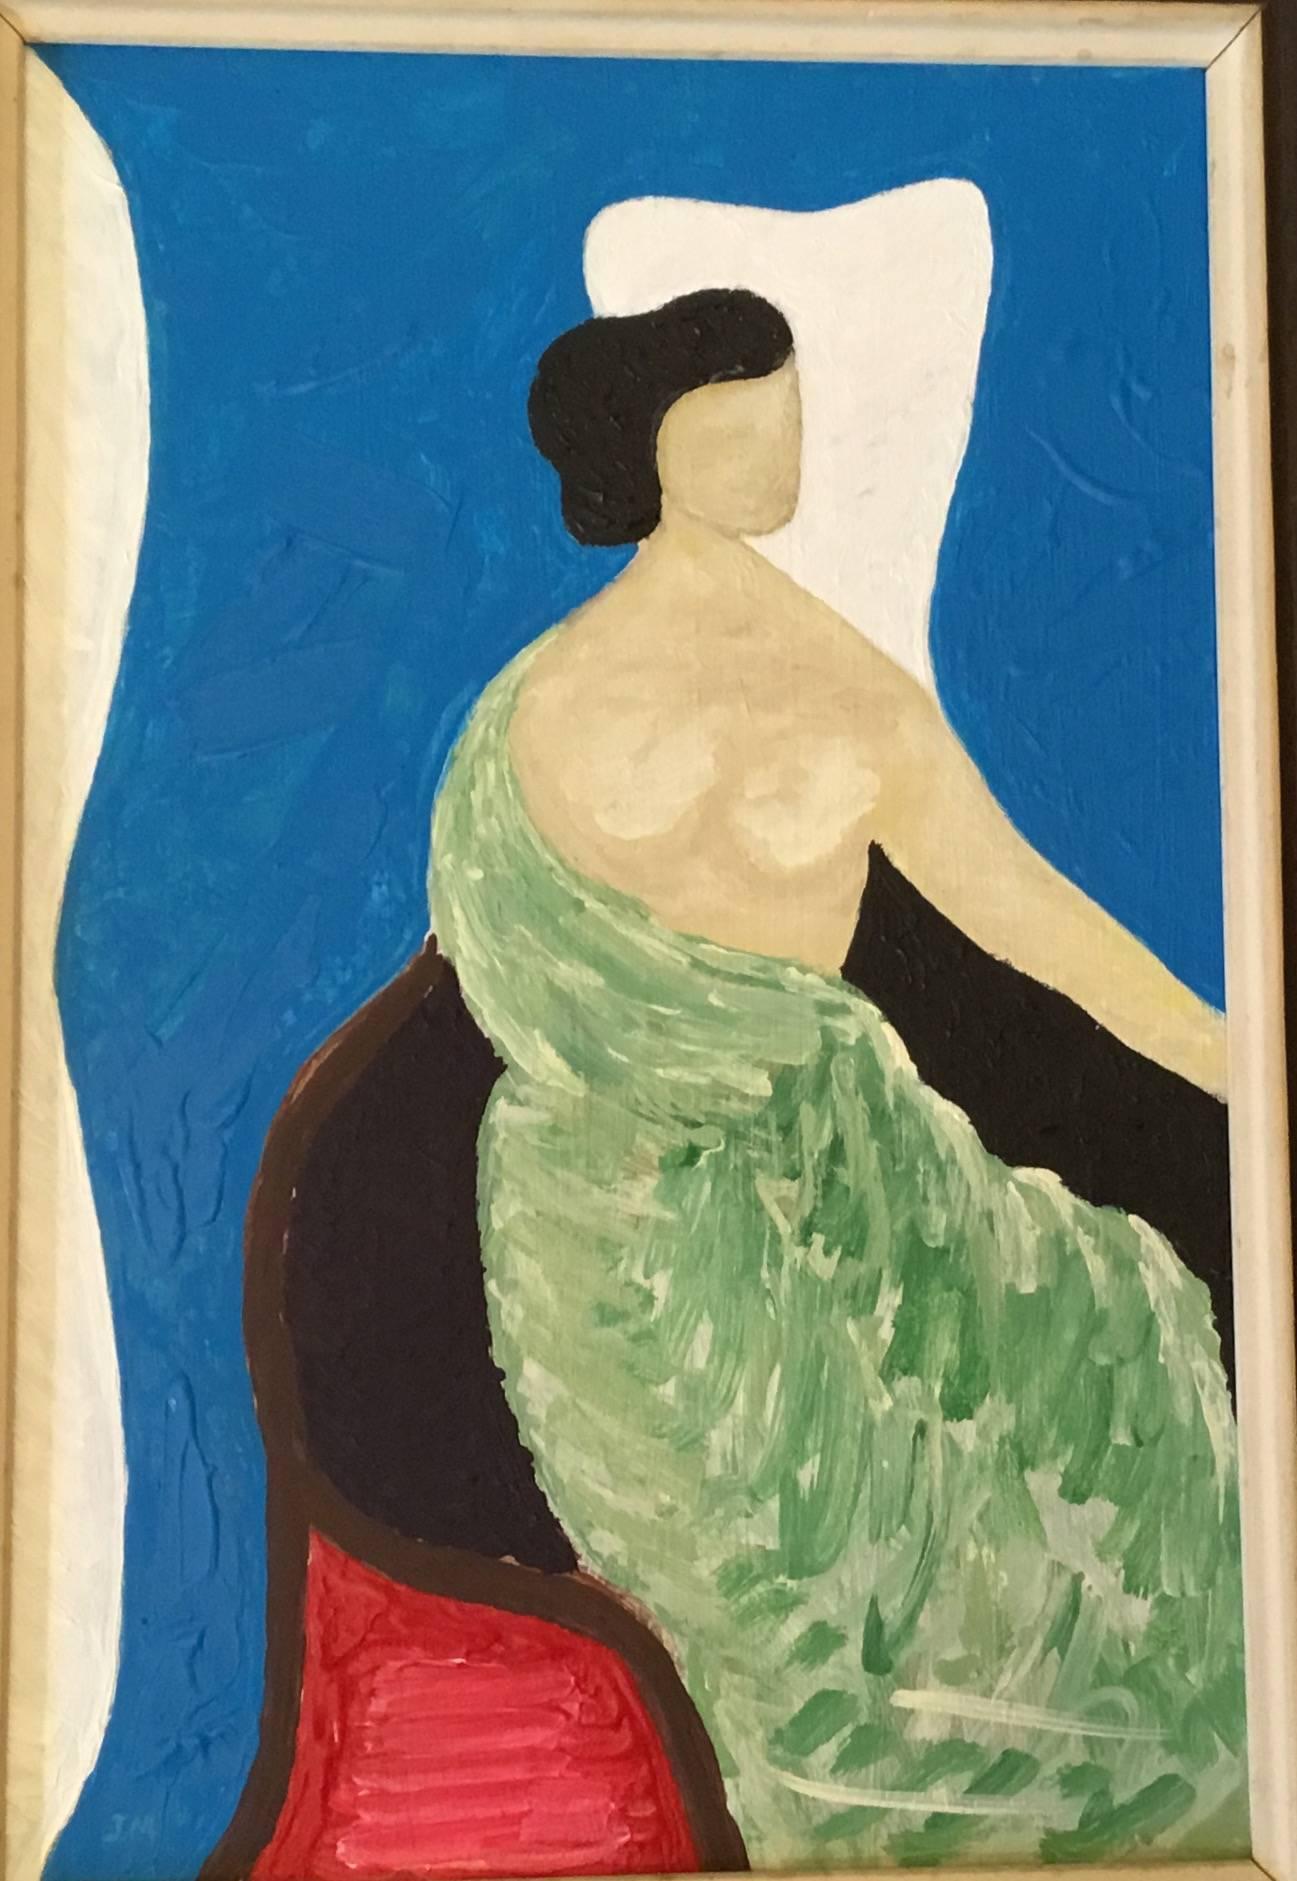 Funky painting of a sitting elegant women looking forward, beautiful vivid colors on a turquoise background.
Signed: JM.
   